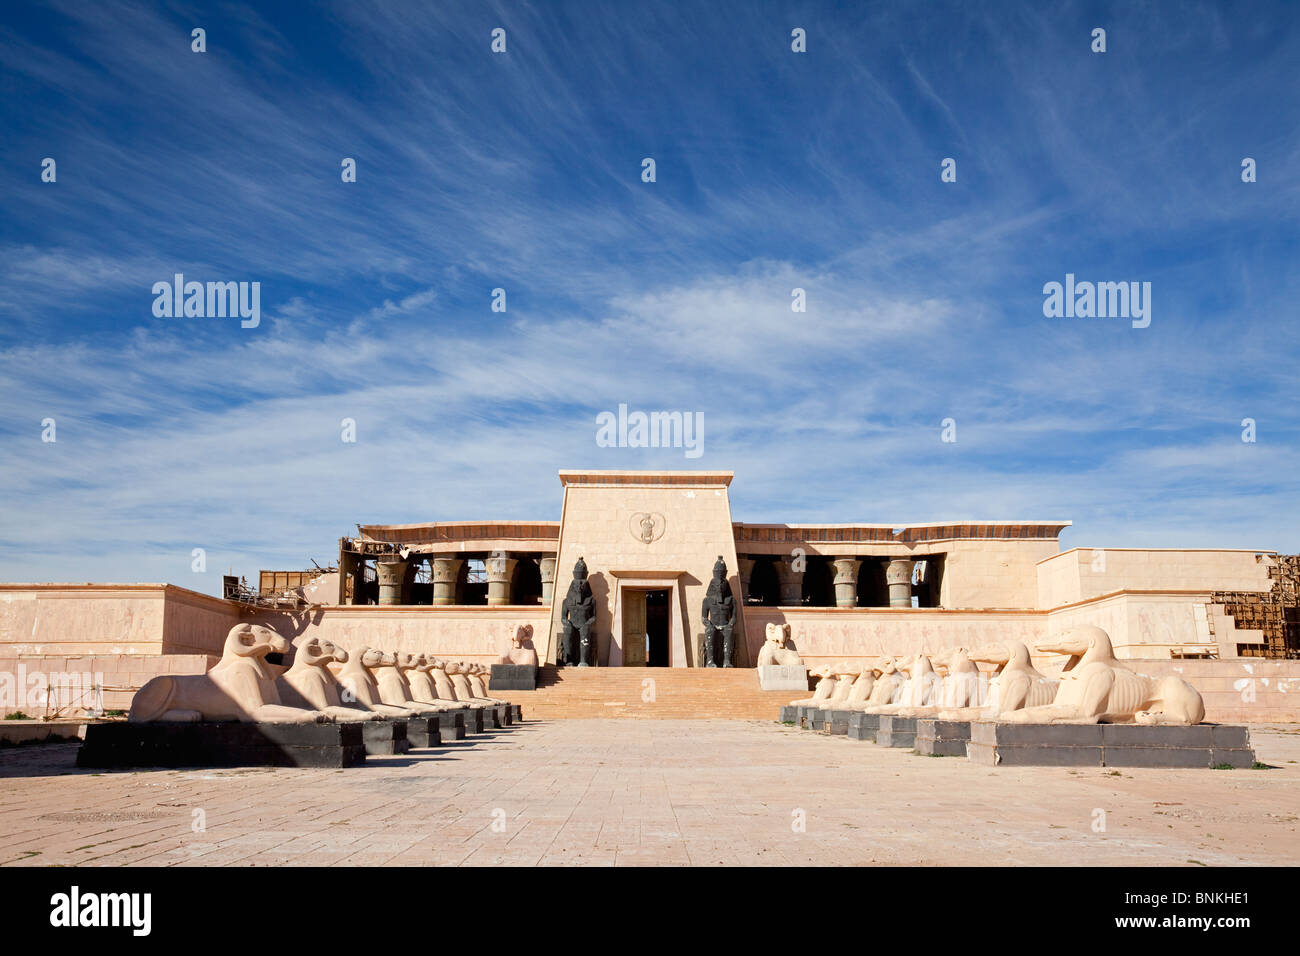 Egyptian set used in movie 'Asterix and Obelix - Mission Cleopatra', Atlas Corporation Studios, Ouarzazate, Morocco Stock Photo